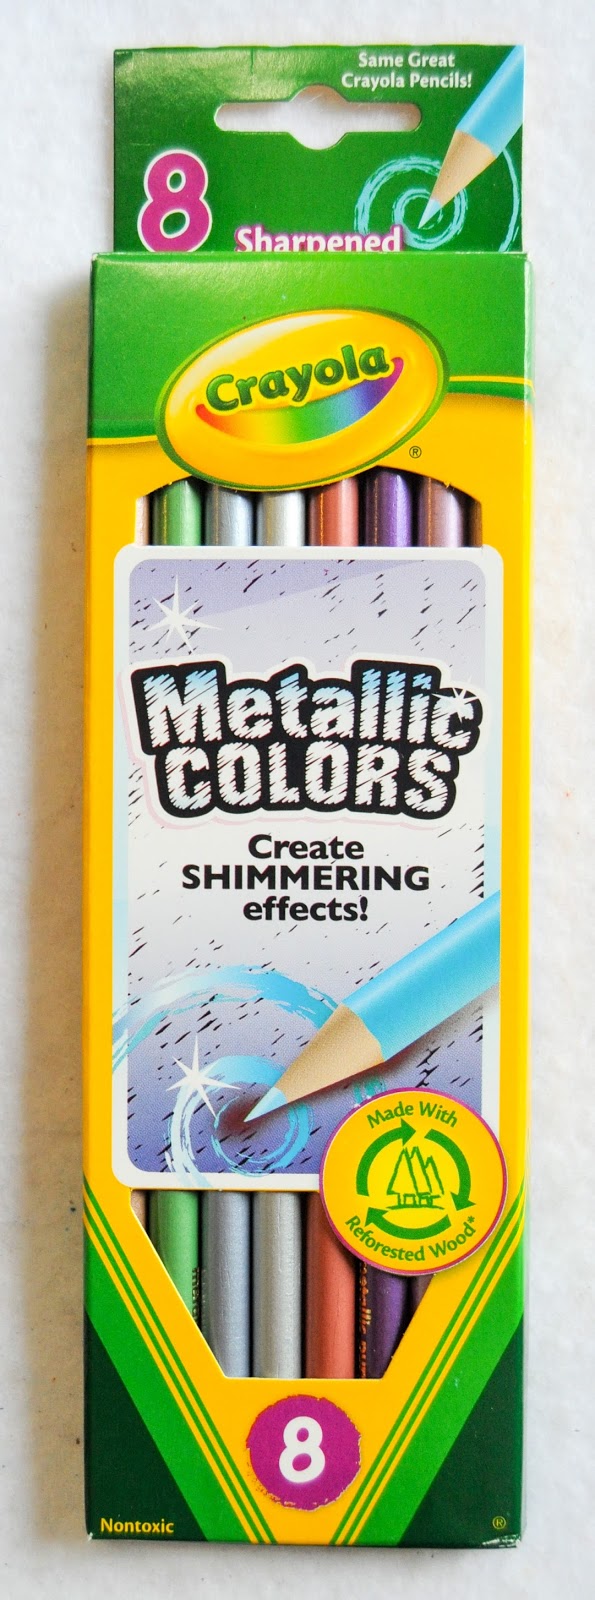 8 Count Crayola Metallic Colored Pencils: What's Inside the Box